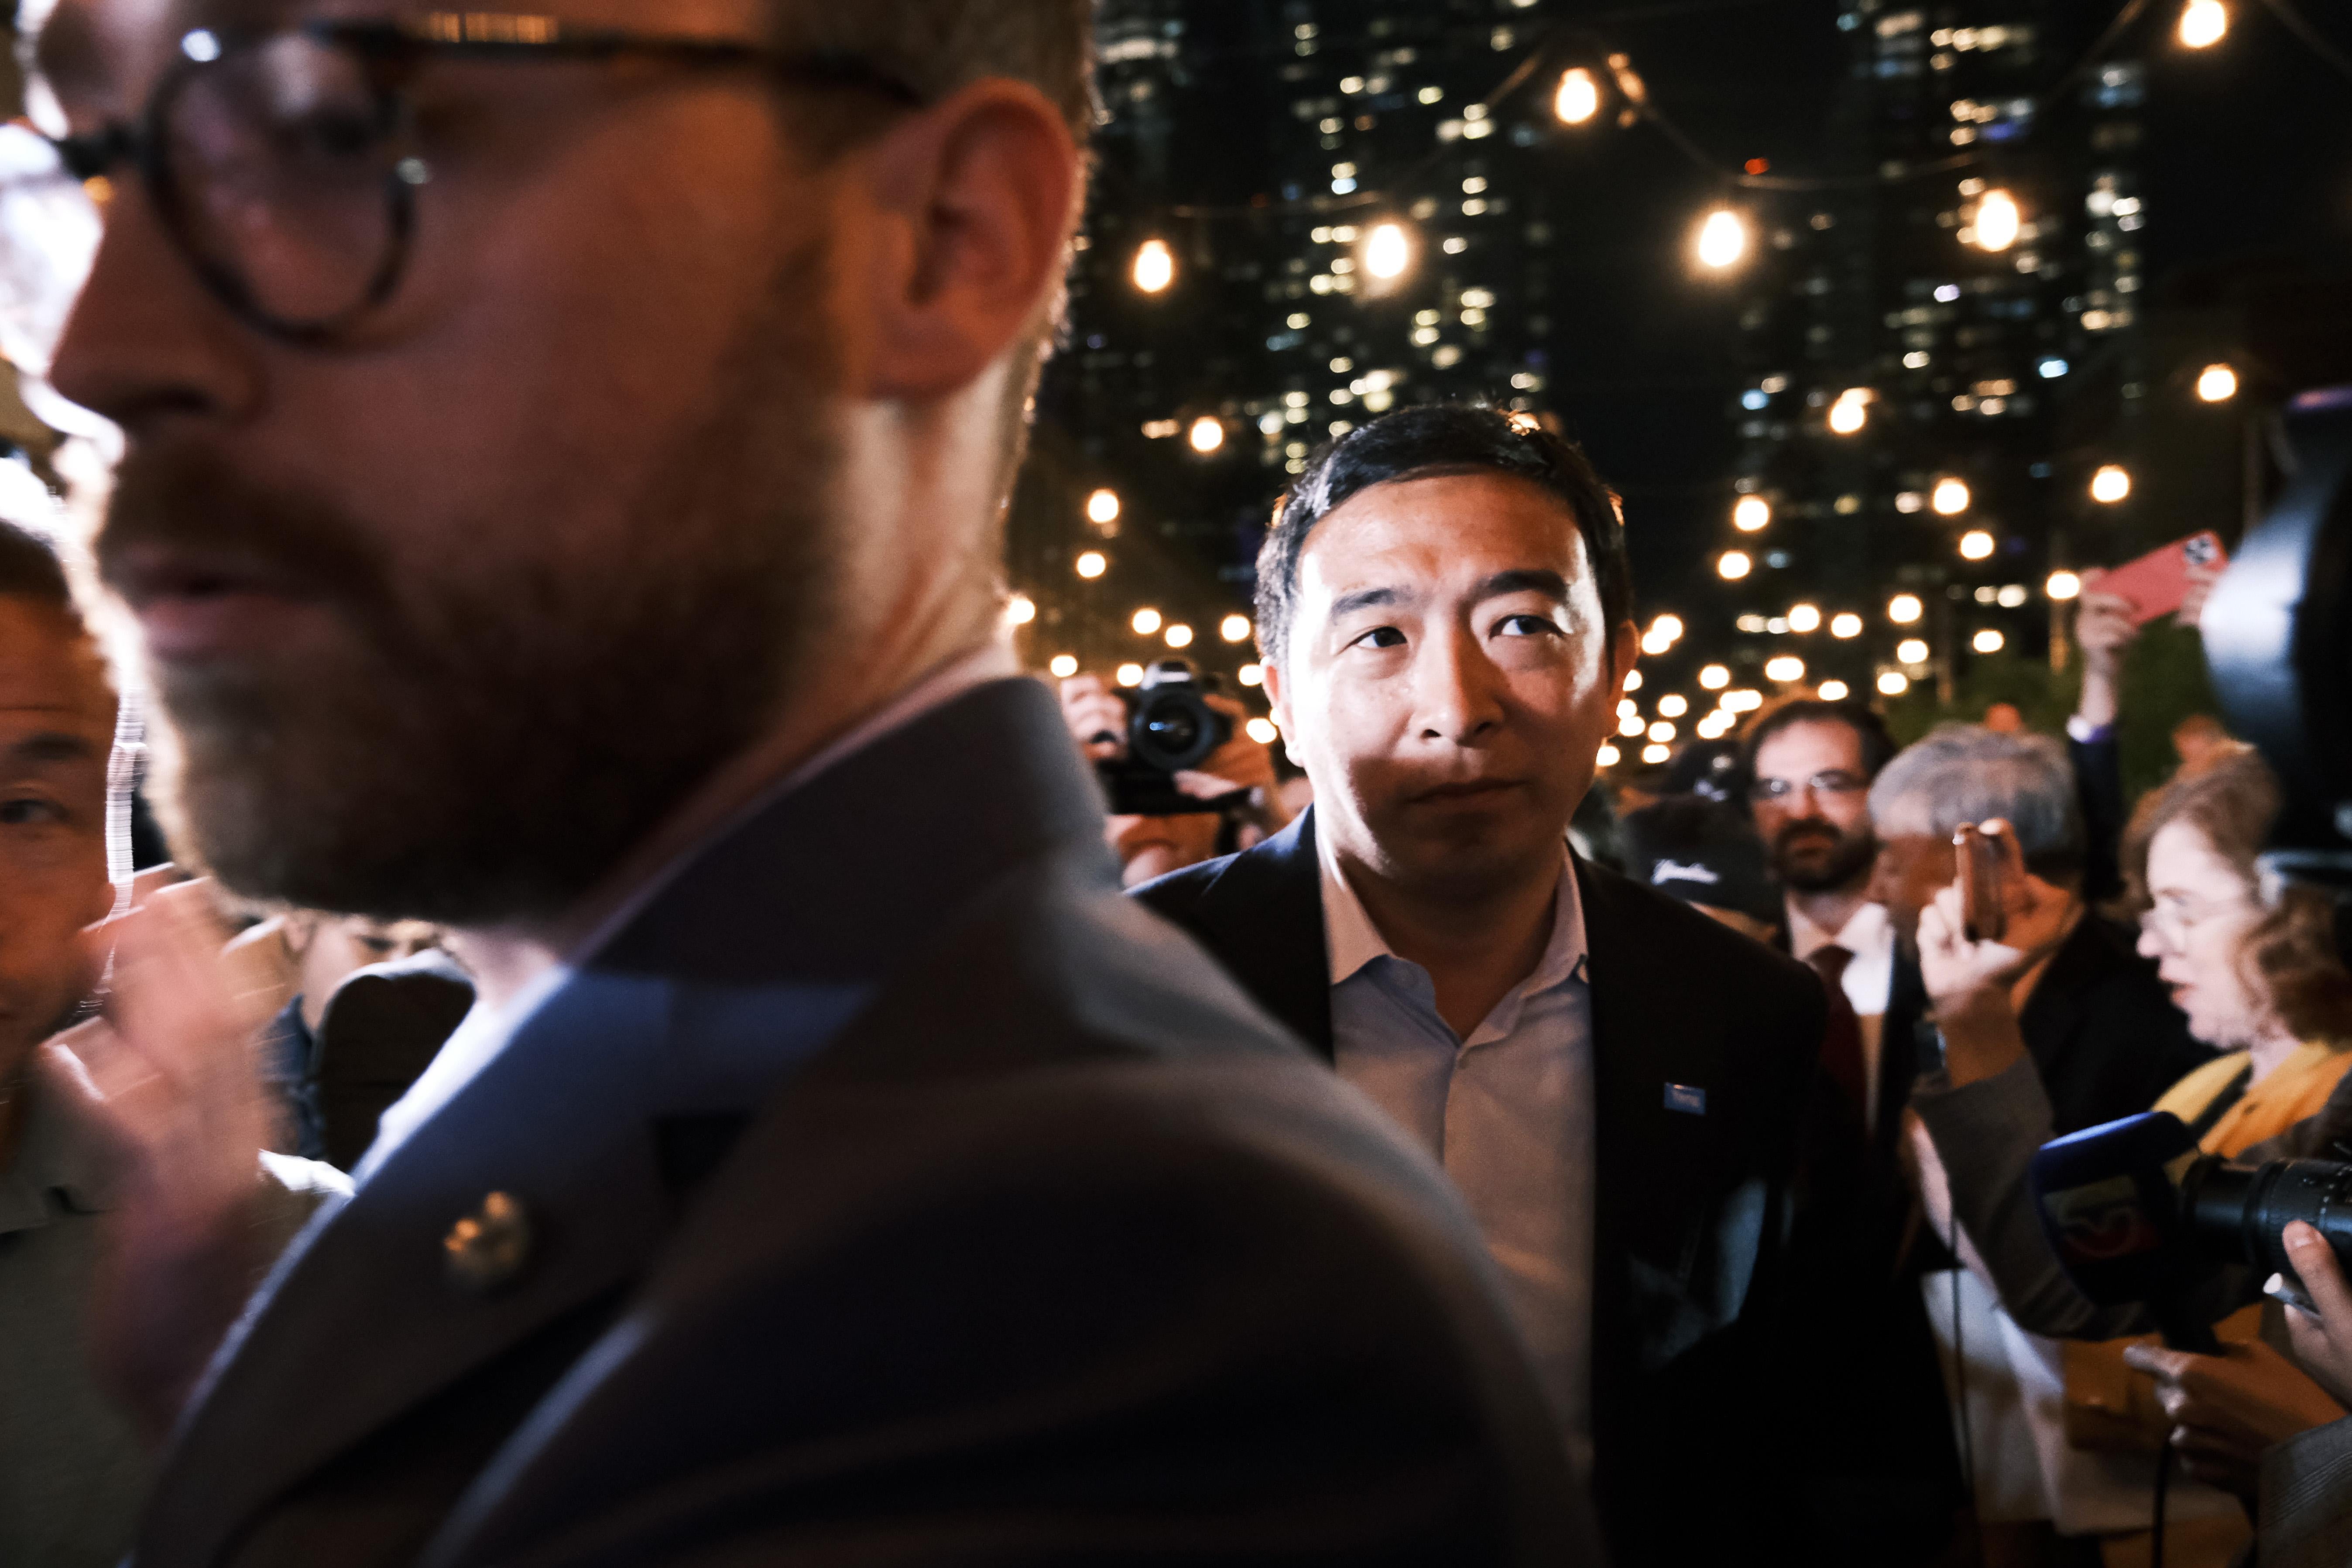 NEW YORK, NEW YORK - JUNE 22: Mayoral candidate Andrew Yang greets supporters at a Manhattan hotel as he concedes in his campaign for mayor on June 22, 2021 in New York City. Early polls showed Yang, who has never held a political office before, far behind other candidates in the Democratic primary. Ranked choice voting is being used for the first time, a system that lets voters prioritize more than one candidate on their ballot. The winner of the Democratic primary will face off against the Republican candidate in the fall (Photo by Spencer Platt/Getty Images)